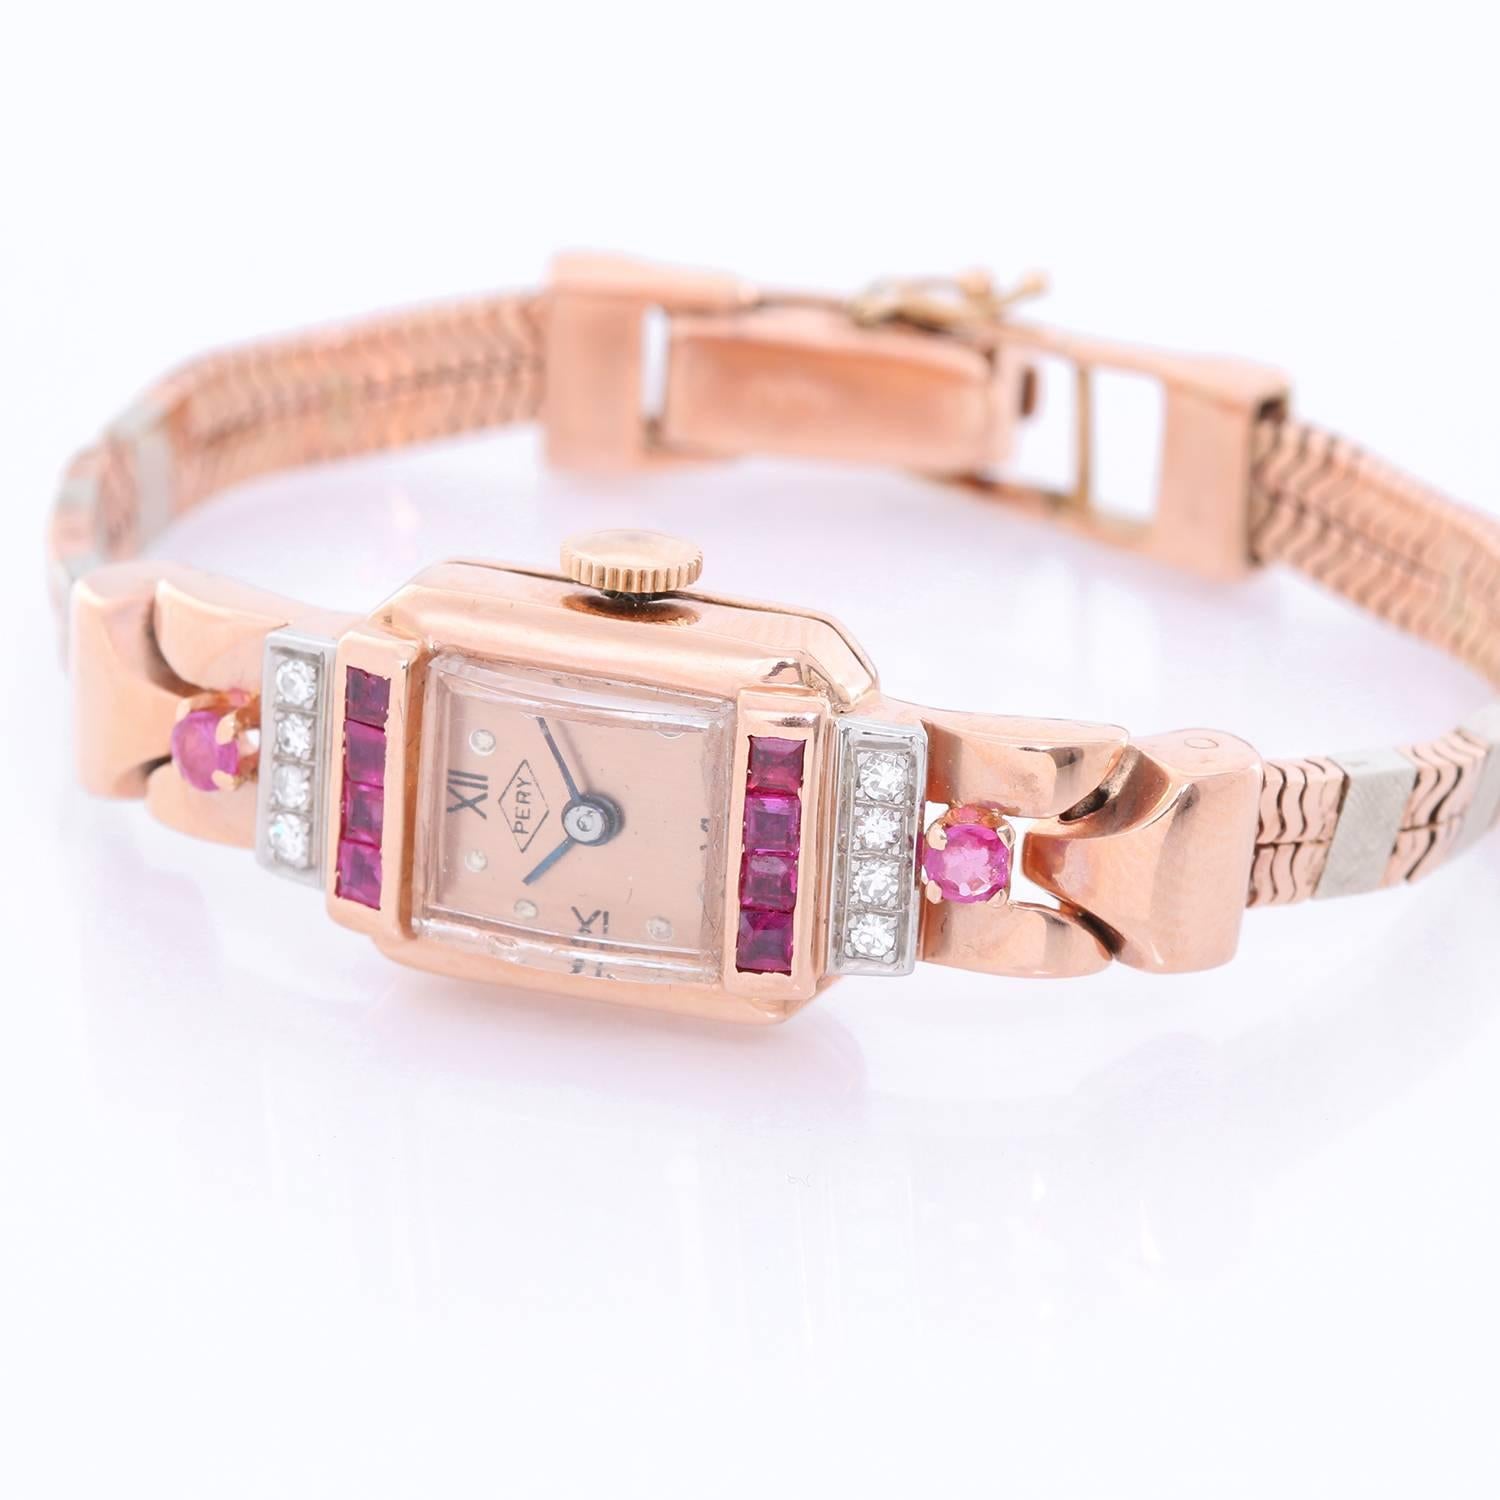 Vintage Ladies Rose Gold (Diamond/Ruby) Pery watch - Manual winding. Rose gold ( 13 x 25 mm ). Rose gold dial with Roman numeral markers. Art deco rose gold bracelet; will fit a 5 3/4 inch wrist . Pre-owned with custom box.